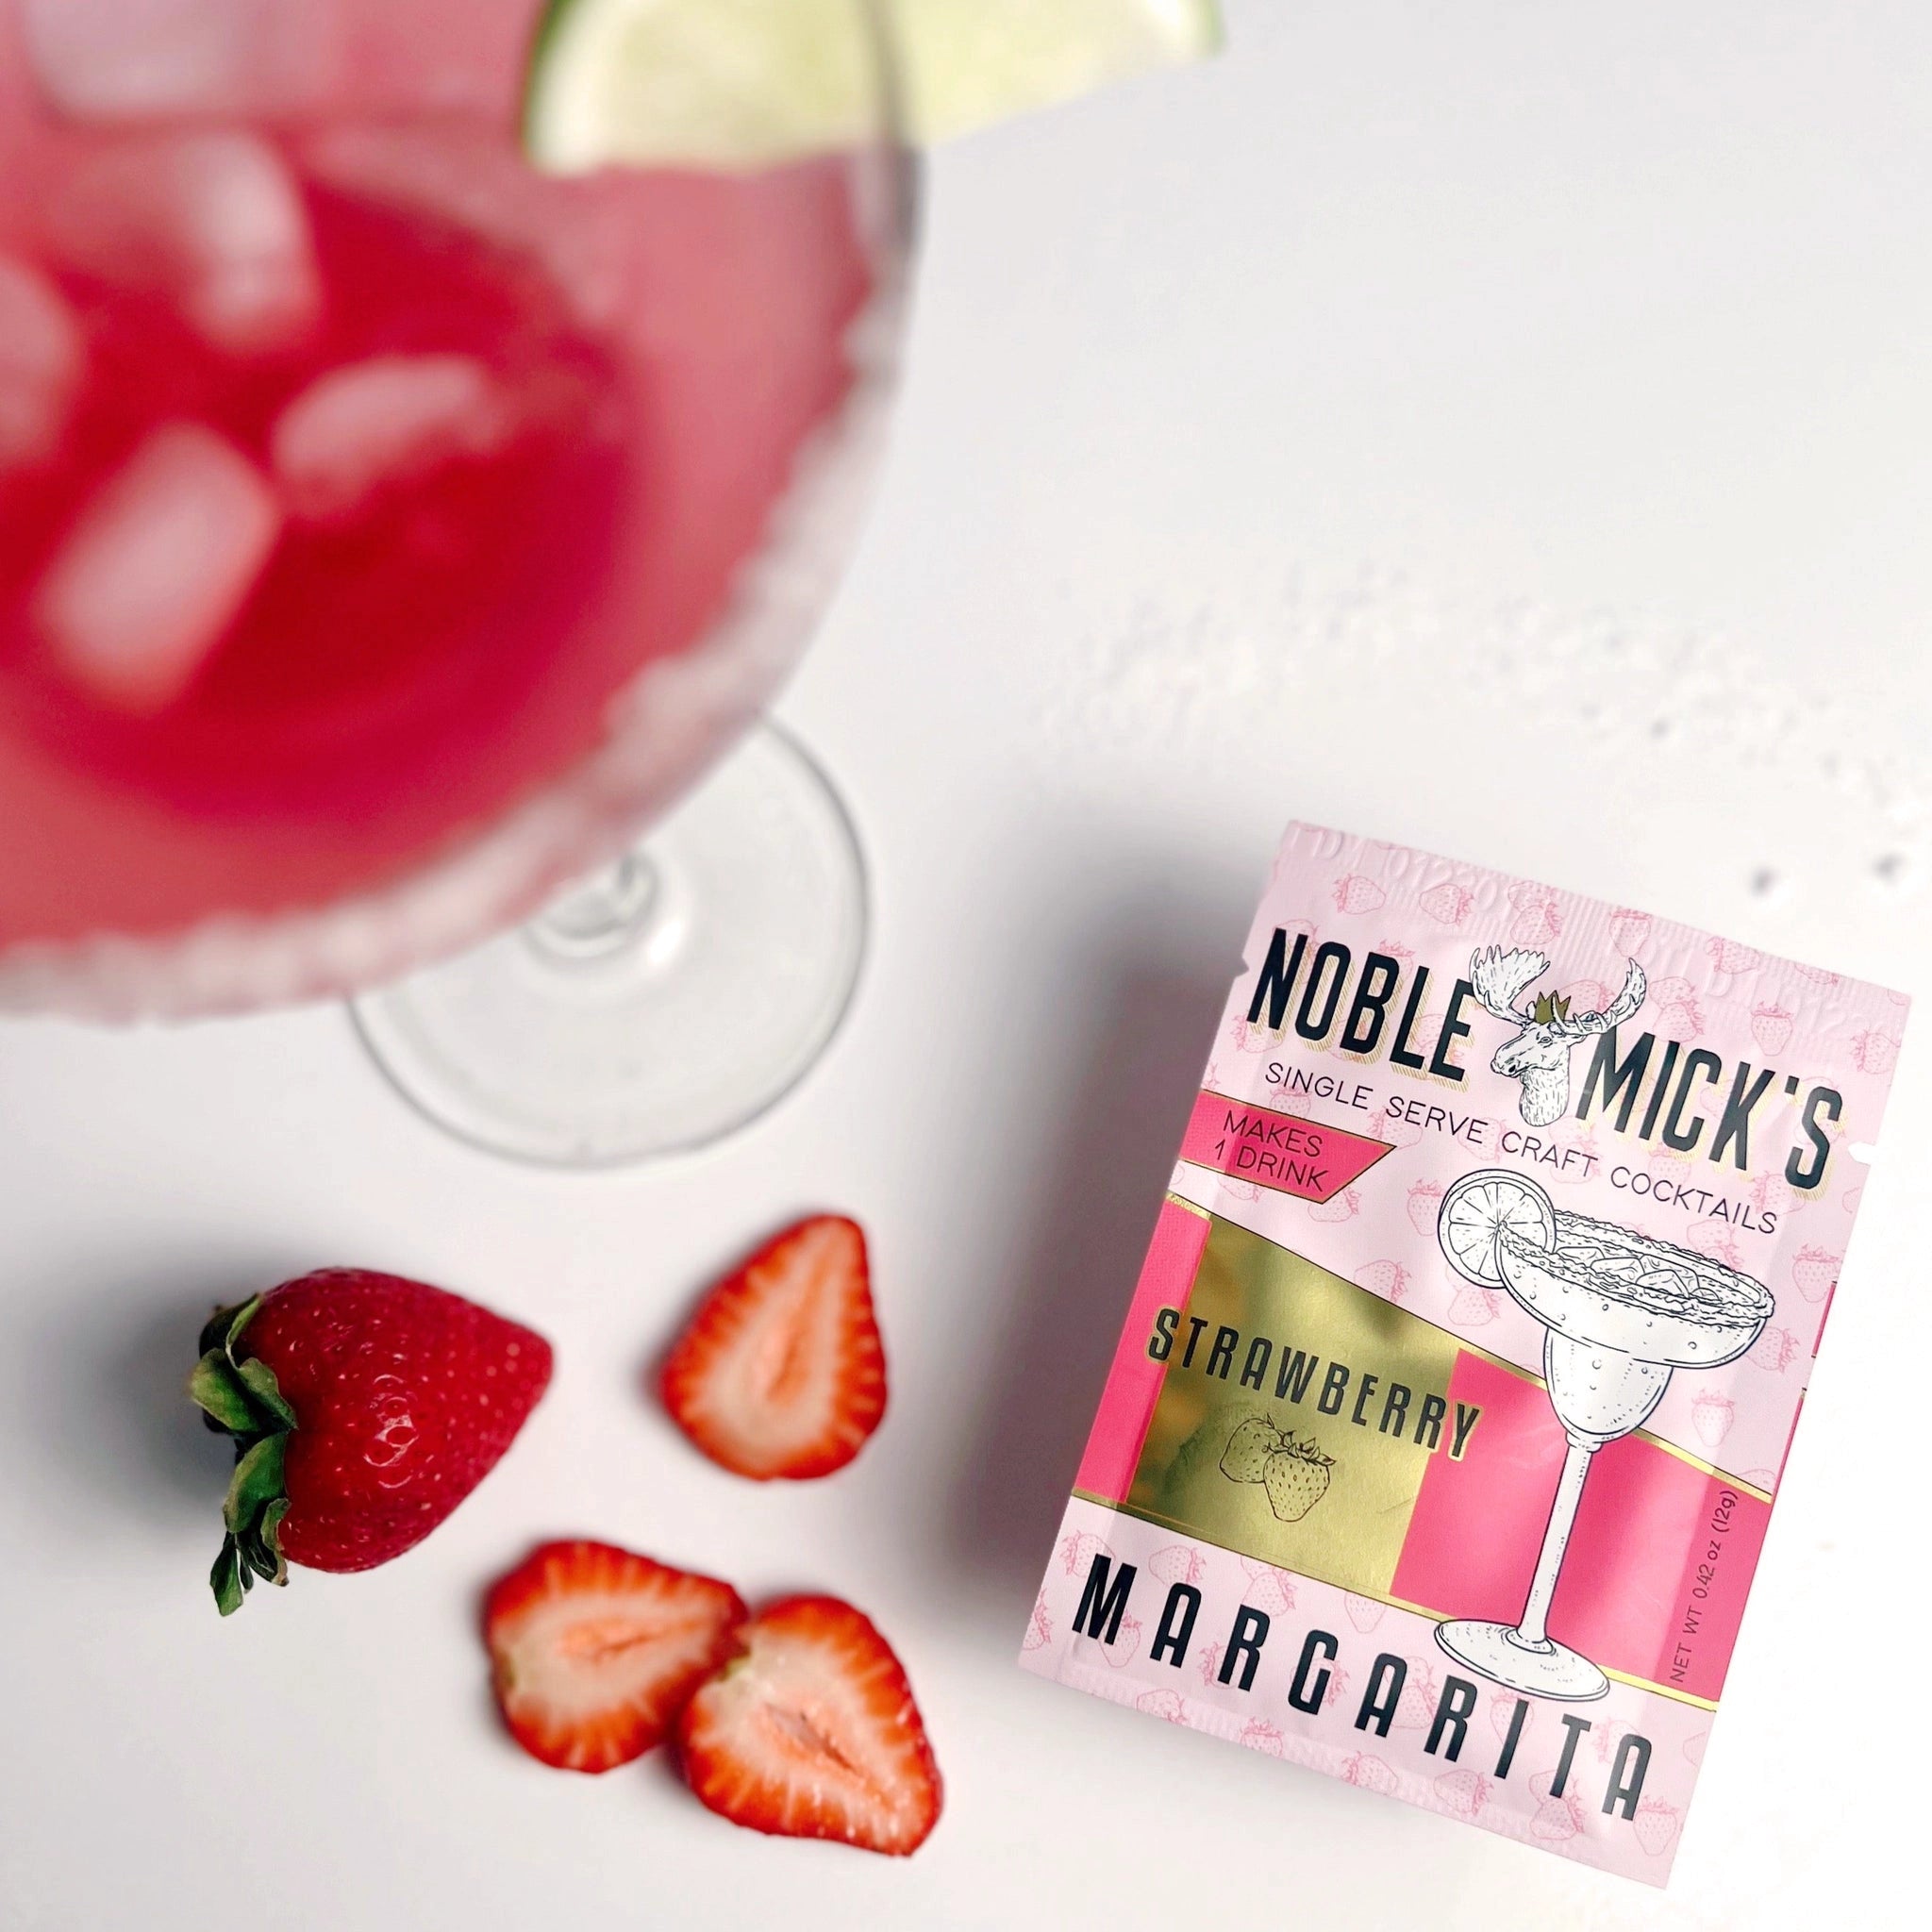 On a white background is a hot pink and light pink packet of cocktail mix that reads, "Noble Micks Single Serve Craft Cocktails Strawberry Margarita" photographed next to a strawberry and a few slices as well as a cocktail glass filled with a pink liquid. 